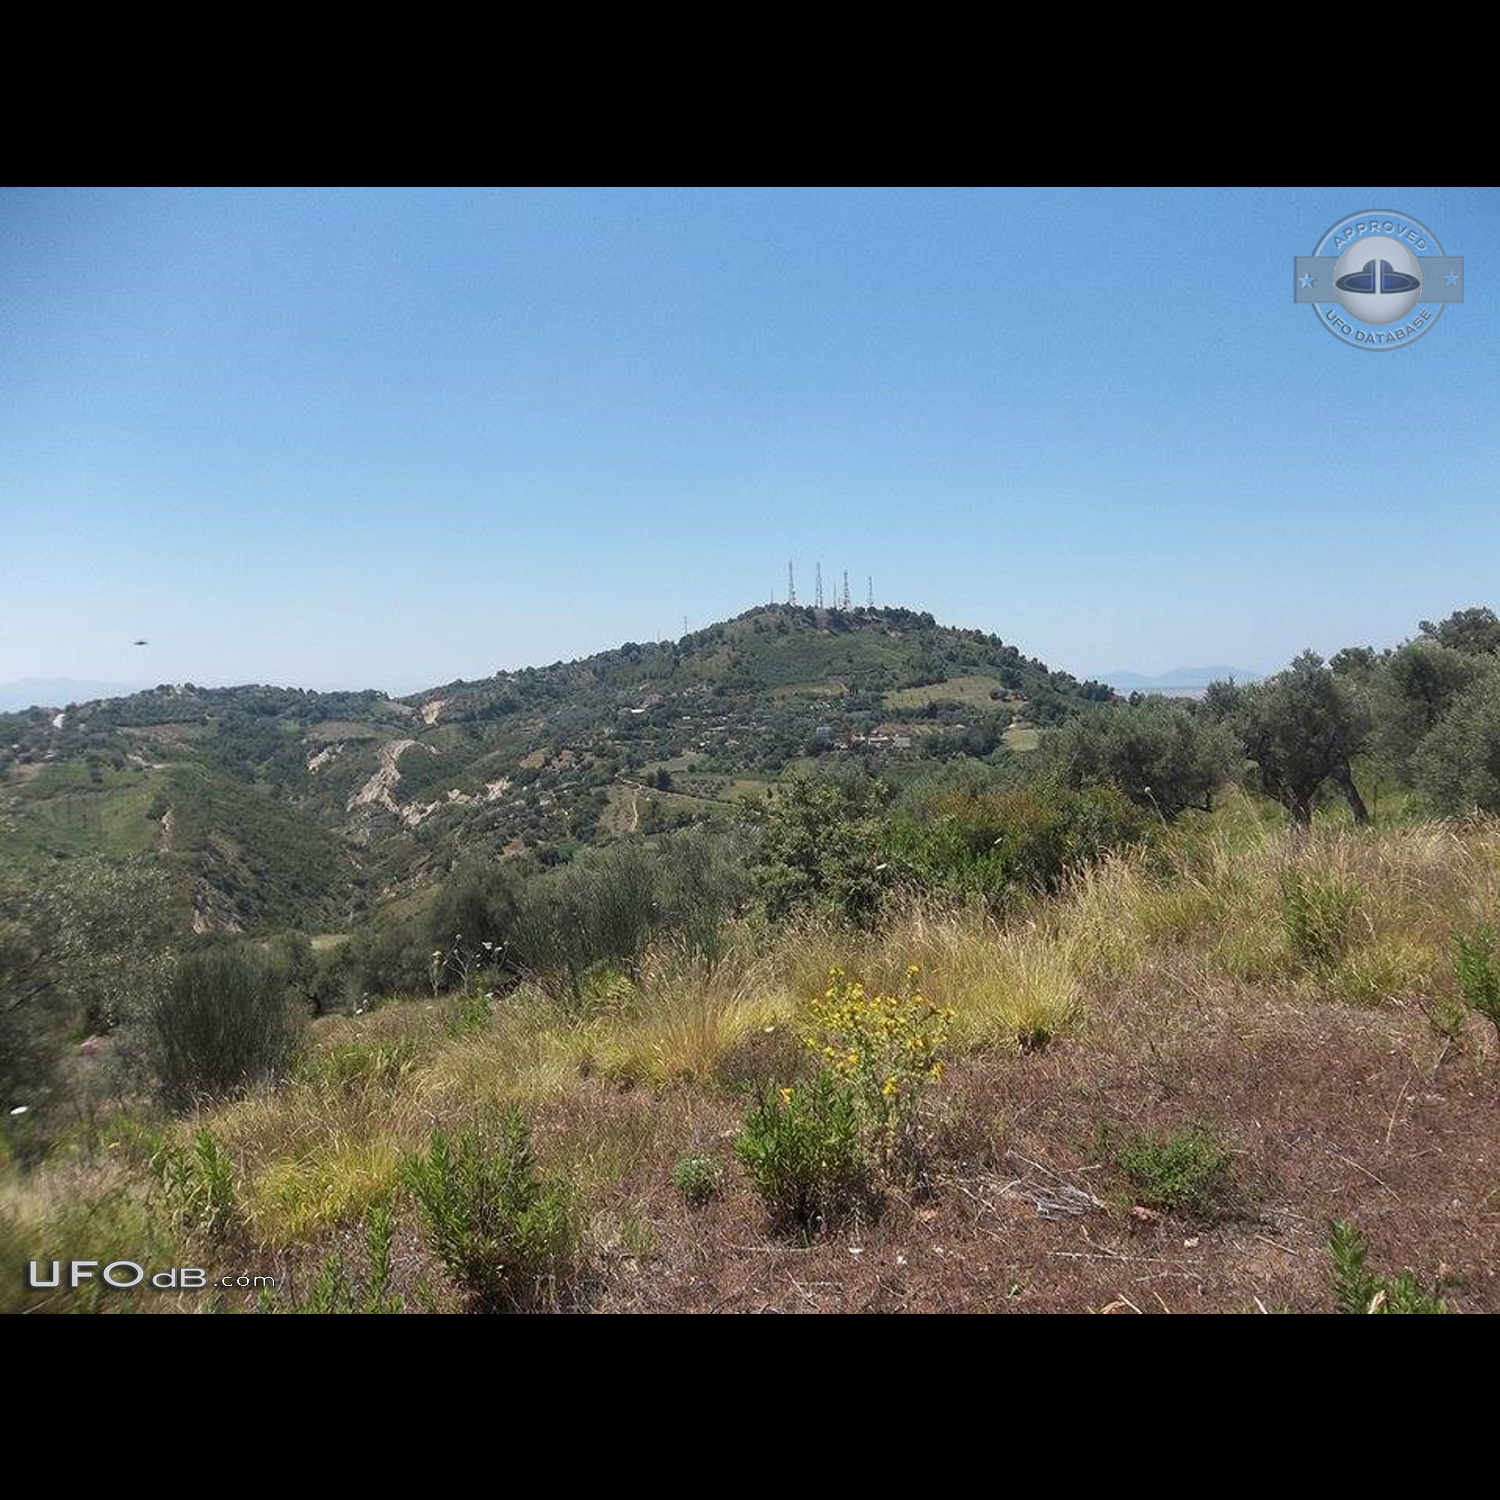 Watching photo at once I recognize the UFO hovering - Fier Albania UFO Picture #749-1